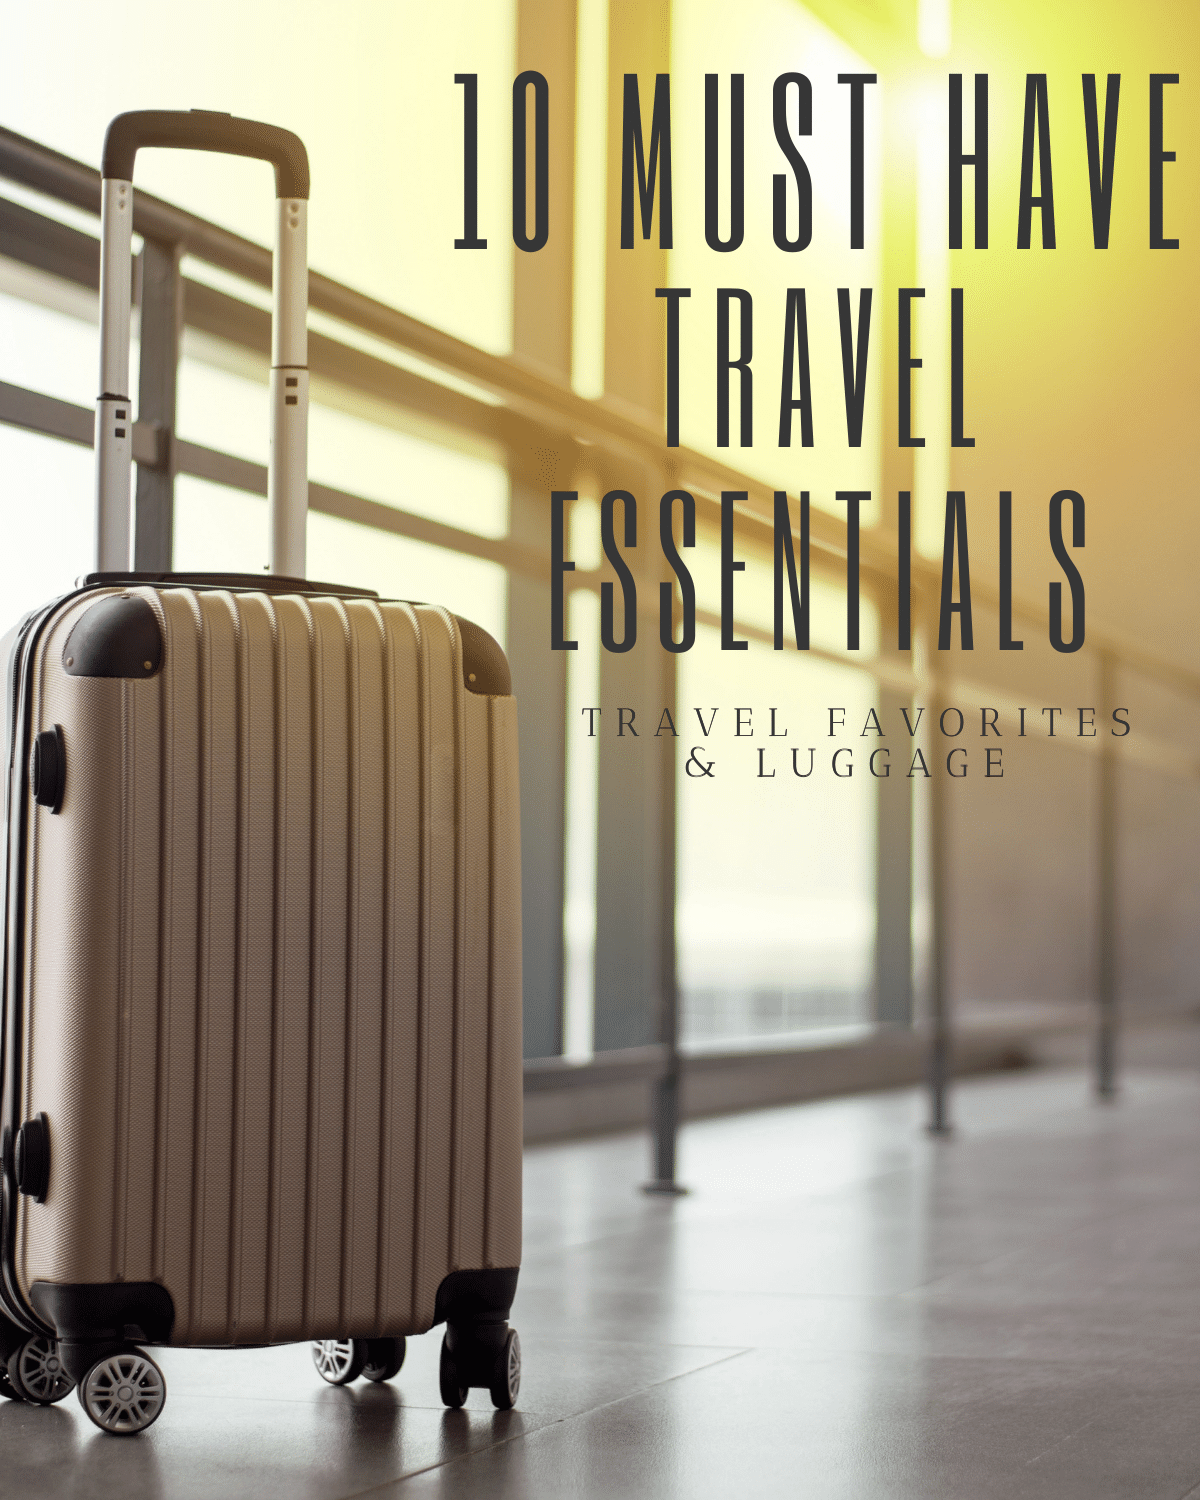 blog feature image, travel must haves, essentials and luggage, travel favorites, blog image 